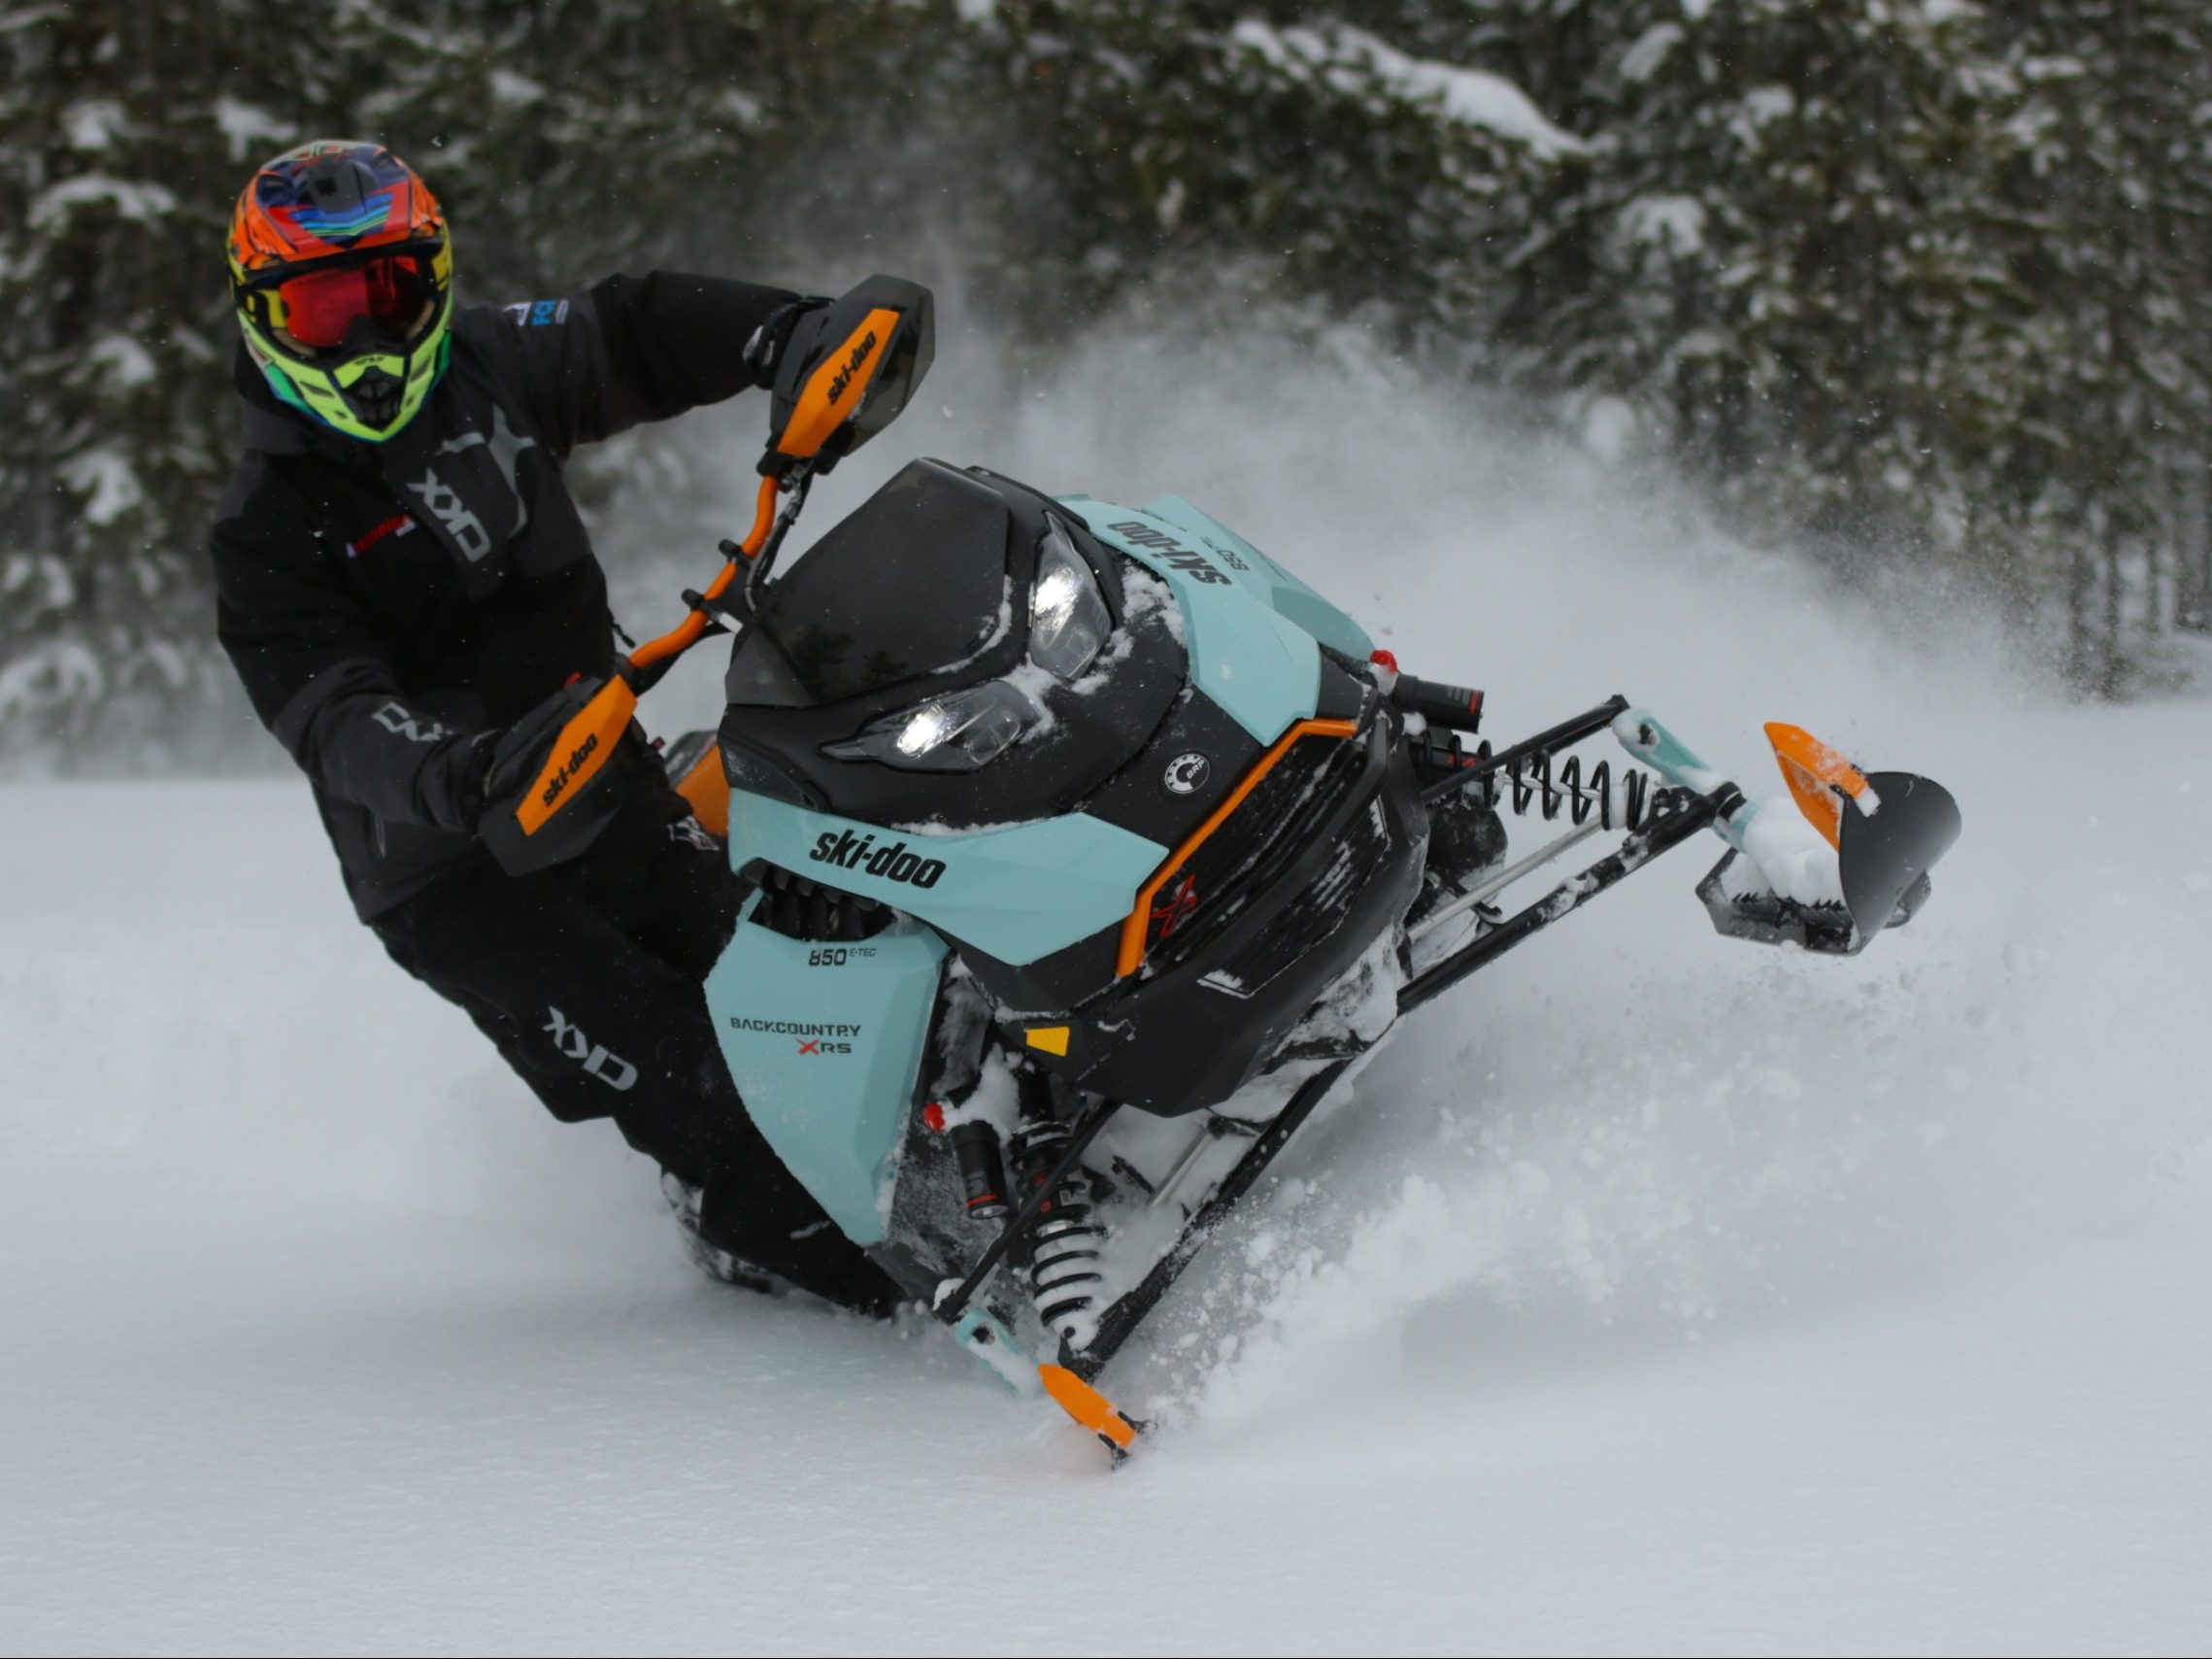 2023 Ski Doo Backcountry - Update Front End for Trail Riding | Ski-Doo ...